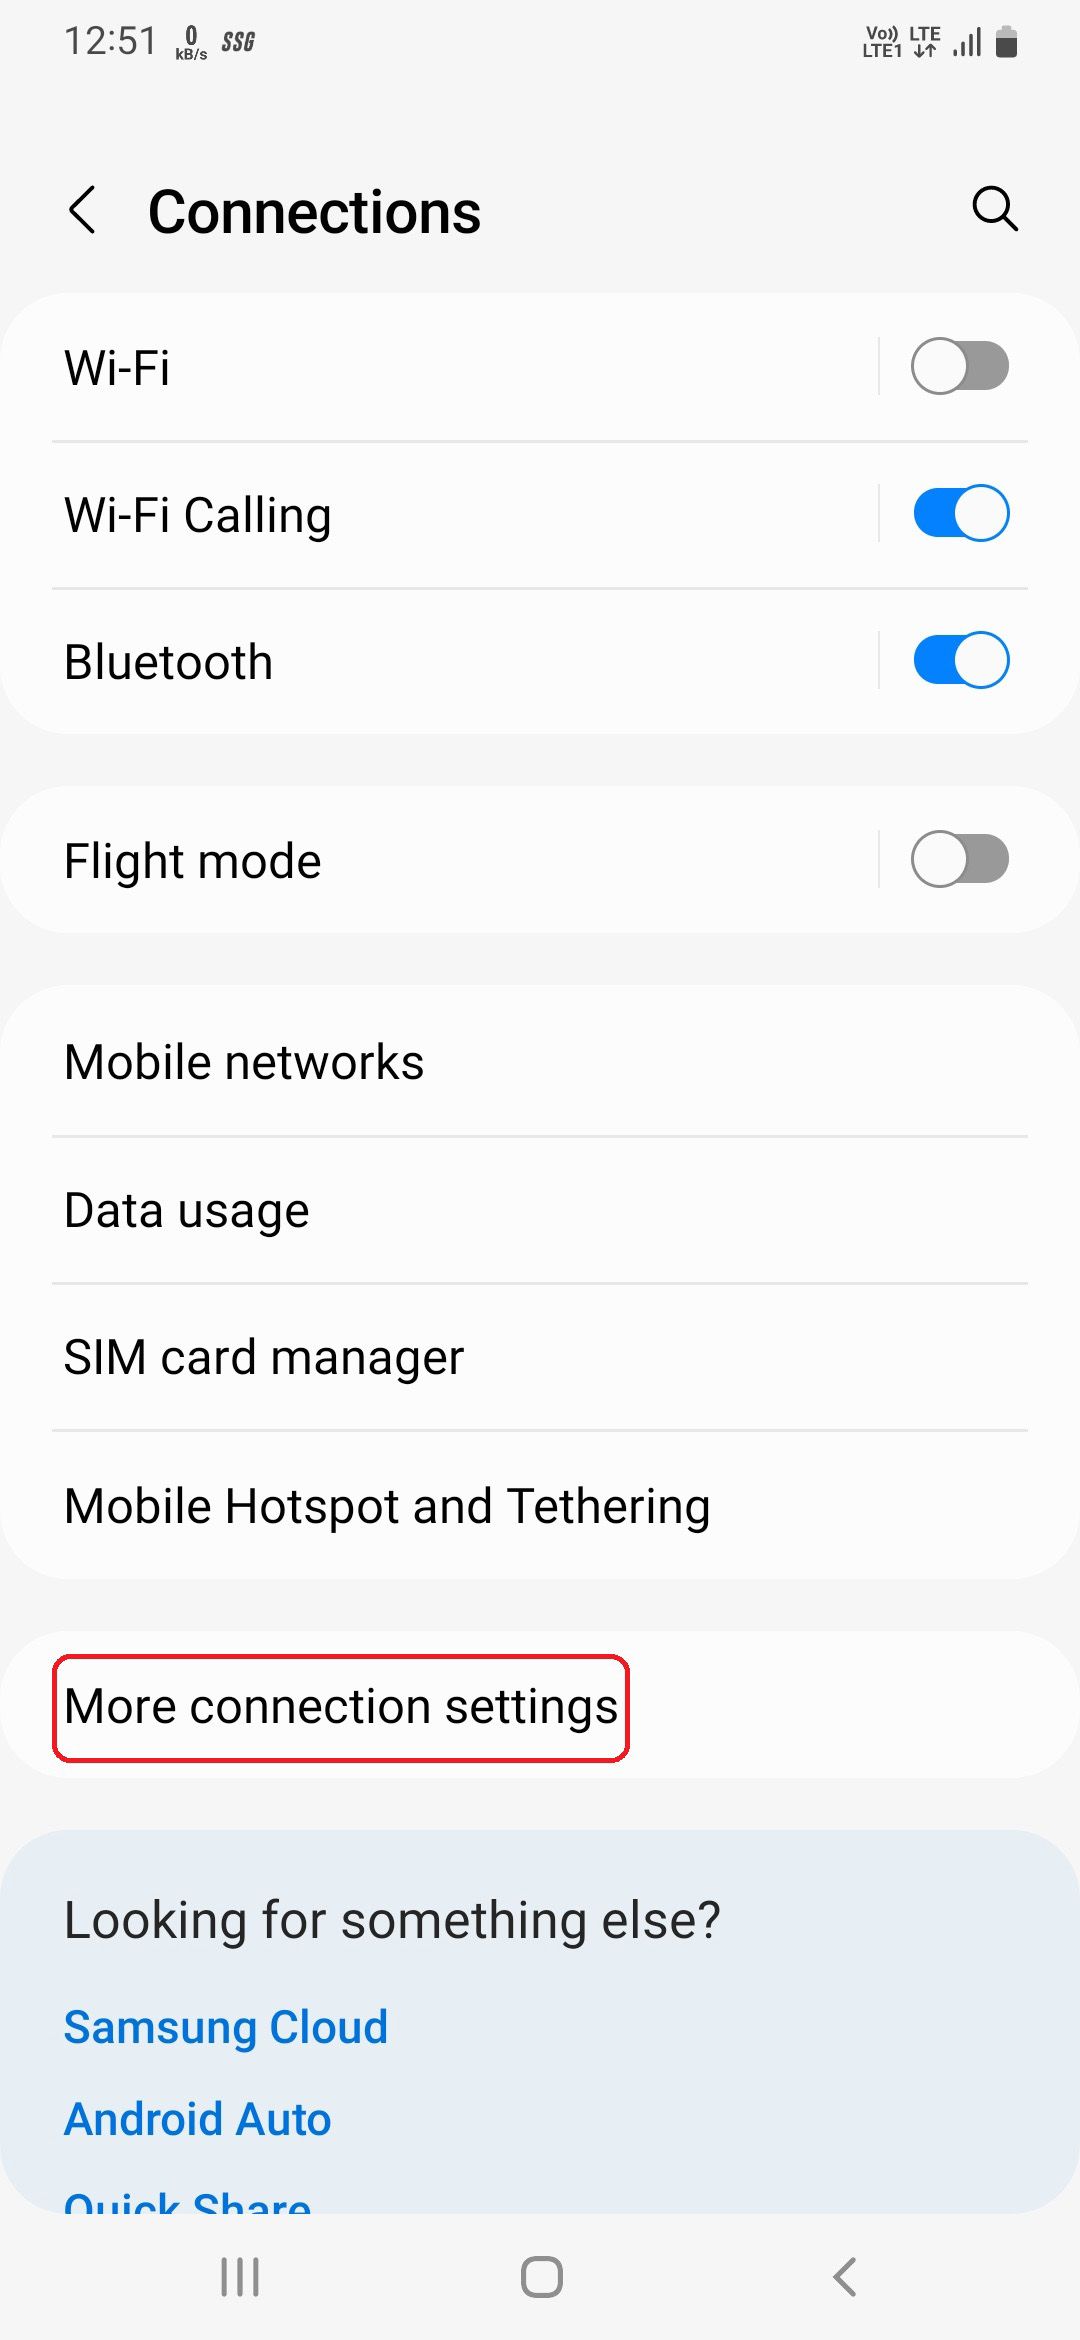 More connection settings option under connections